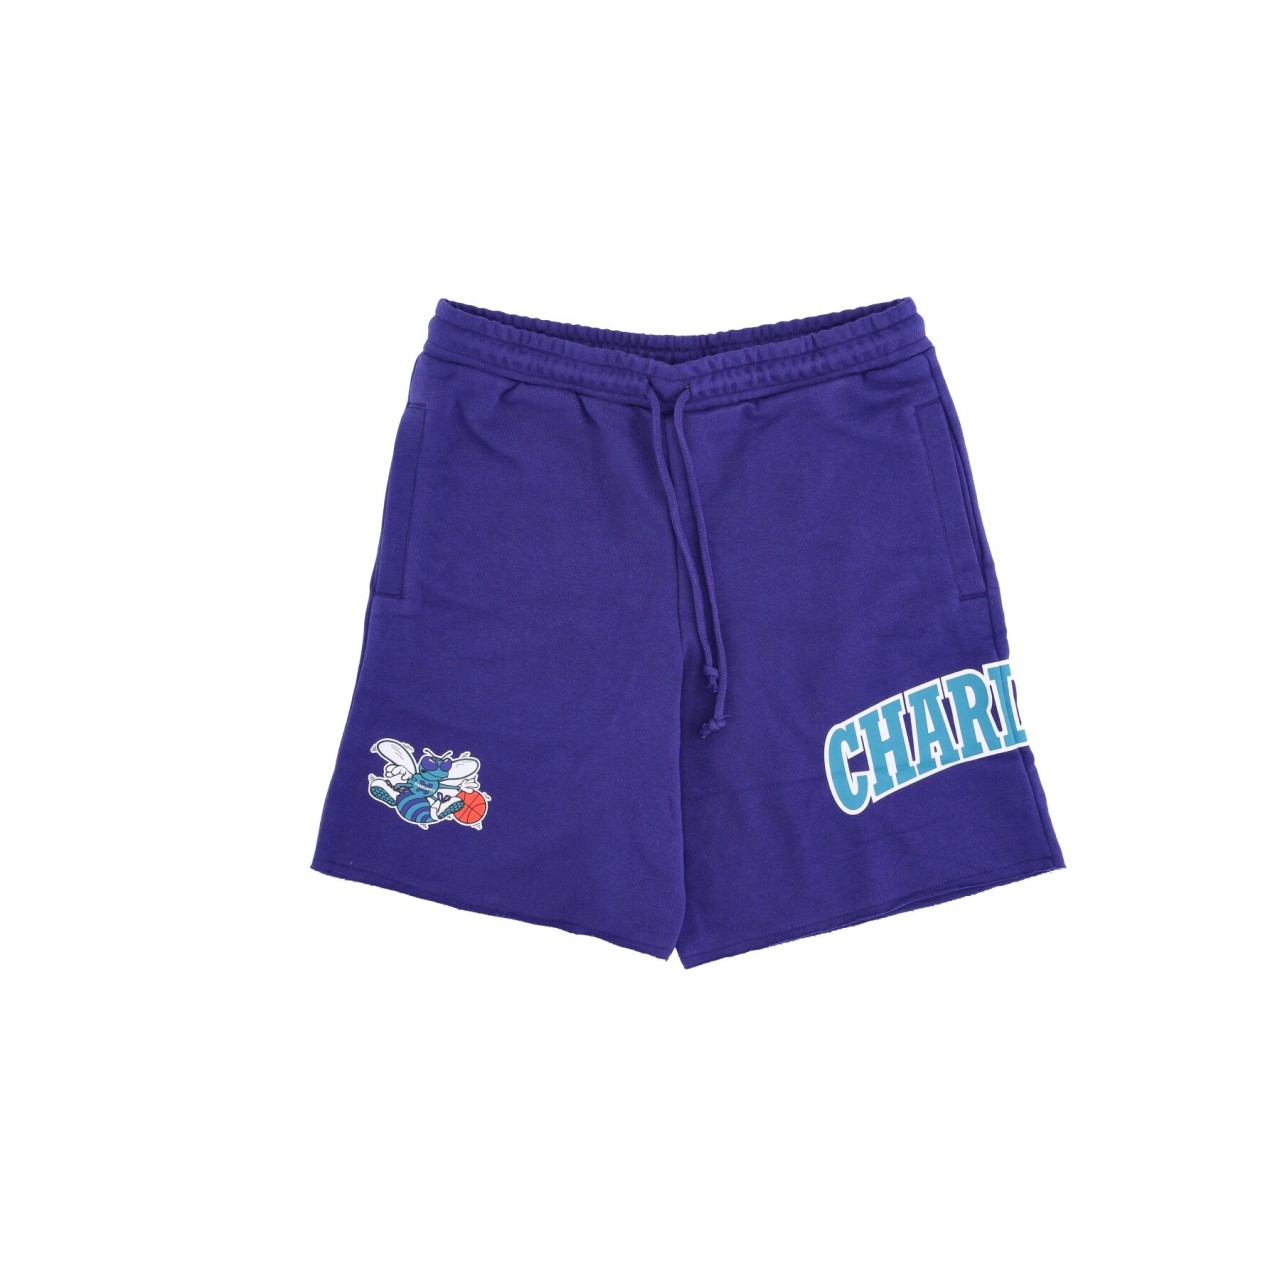 MITCHELL & NESS NBA GAME DAY FRENCH TERRY SHORT HARDWOOD CLASSICS CHAHOR SHORAJ19075-CHODKPR